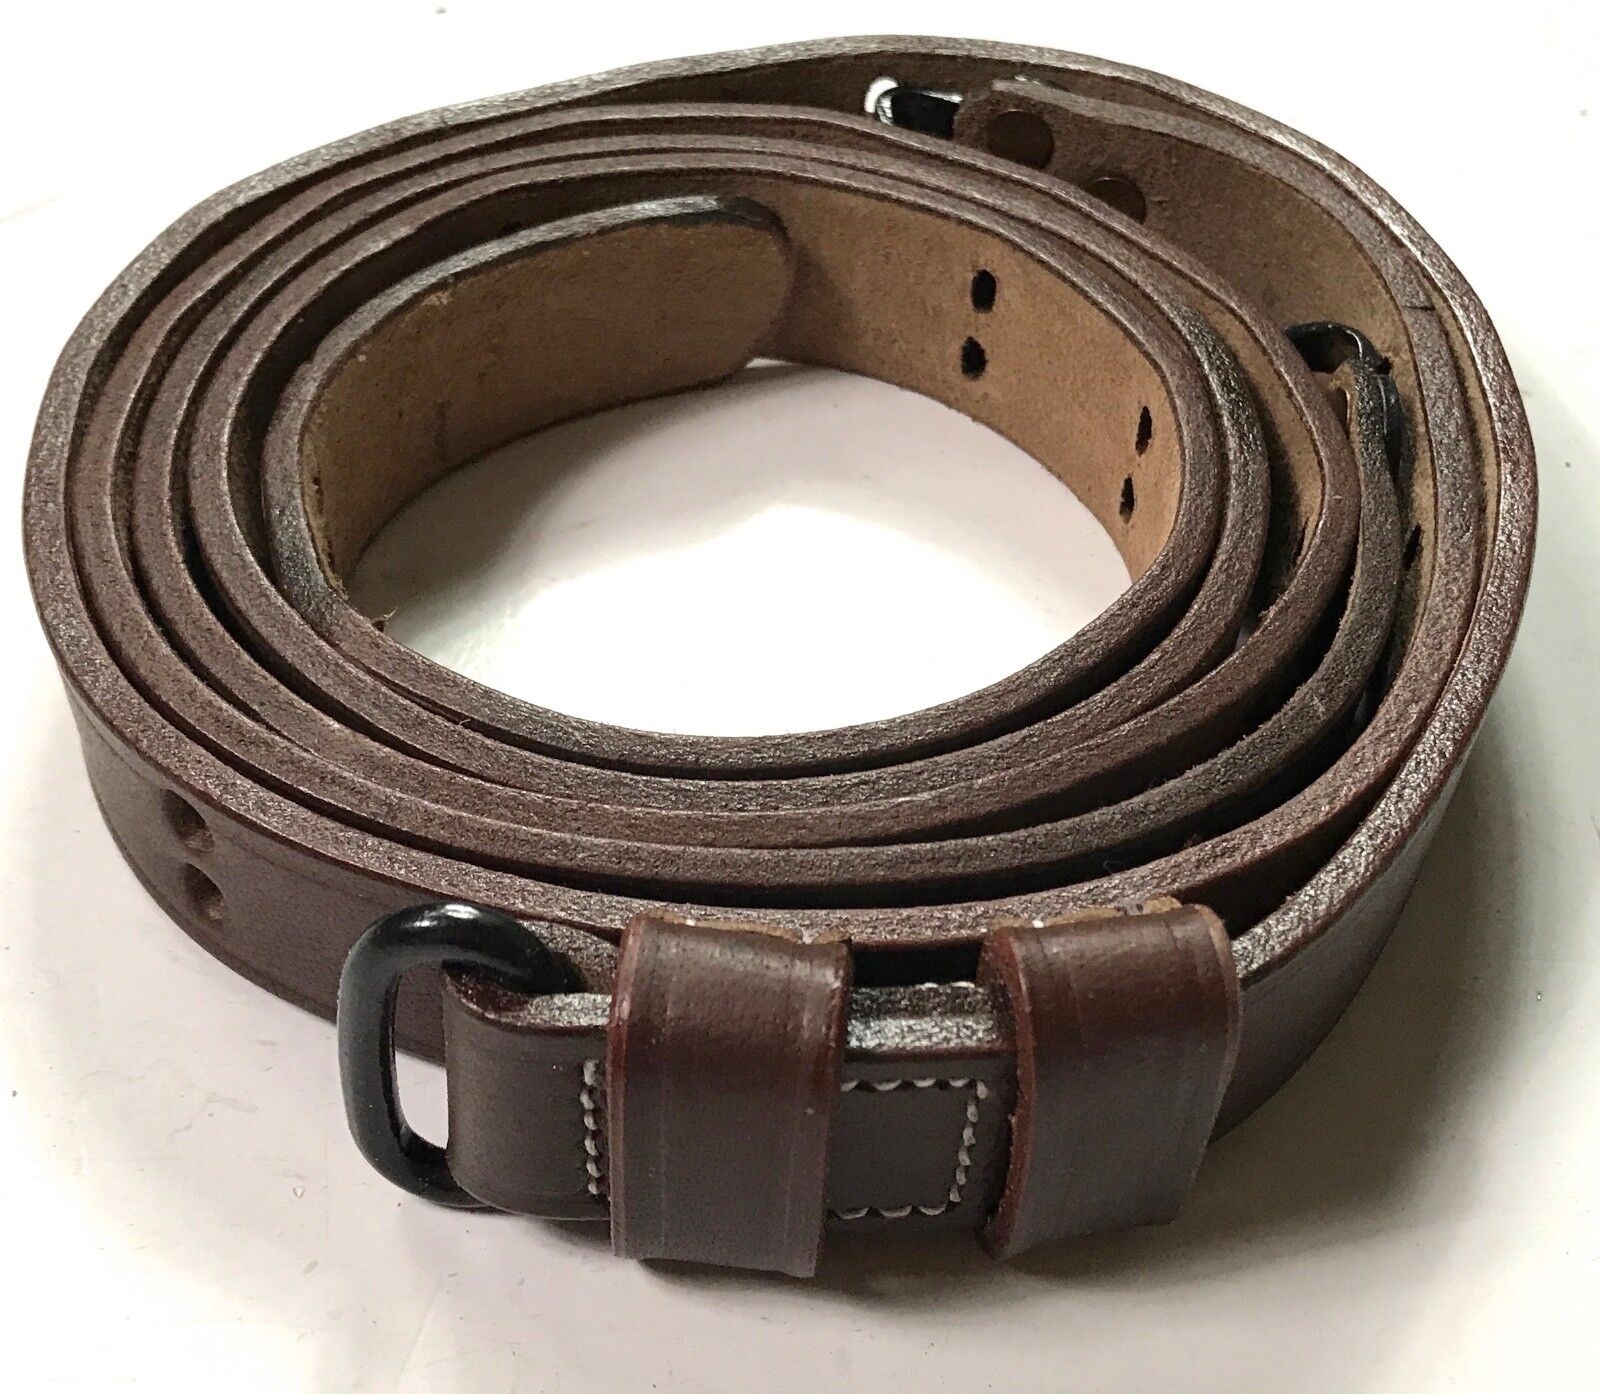 WWII US M1 GARAND RIFLE M1907 LEATHER CARRY SLING-1 INCH